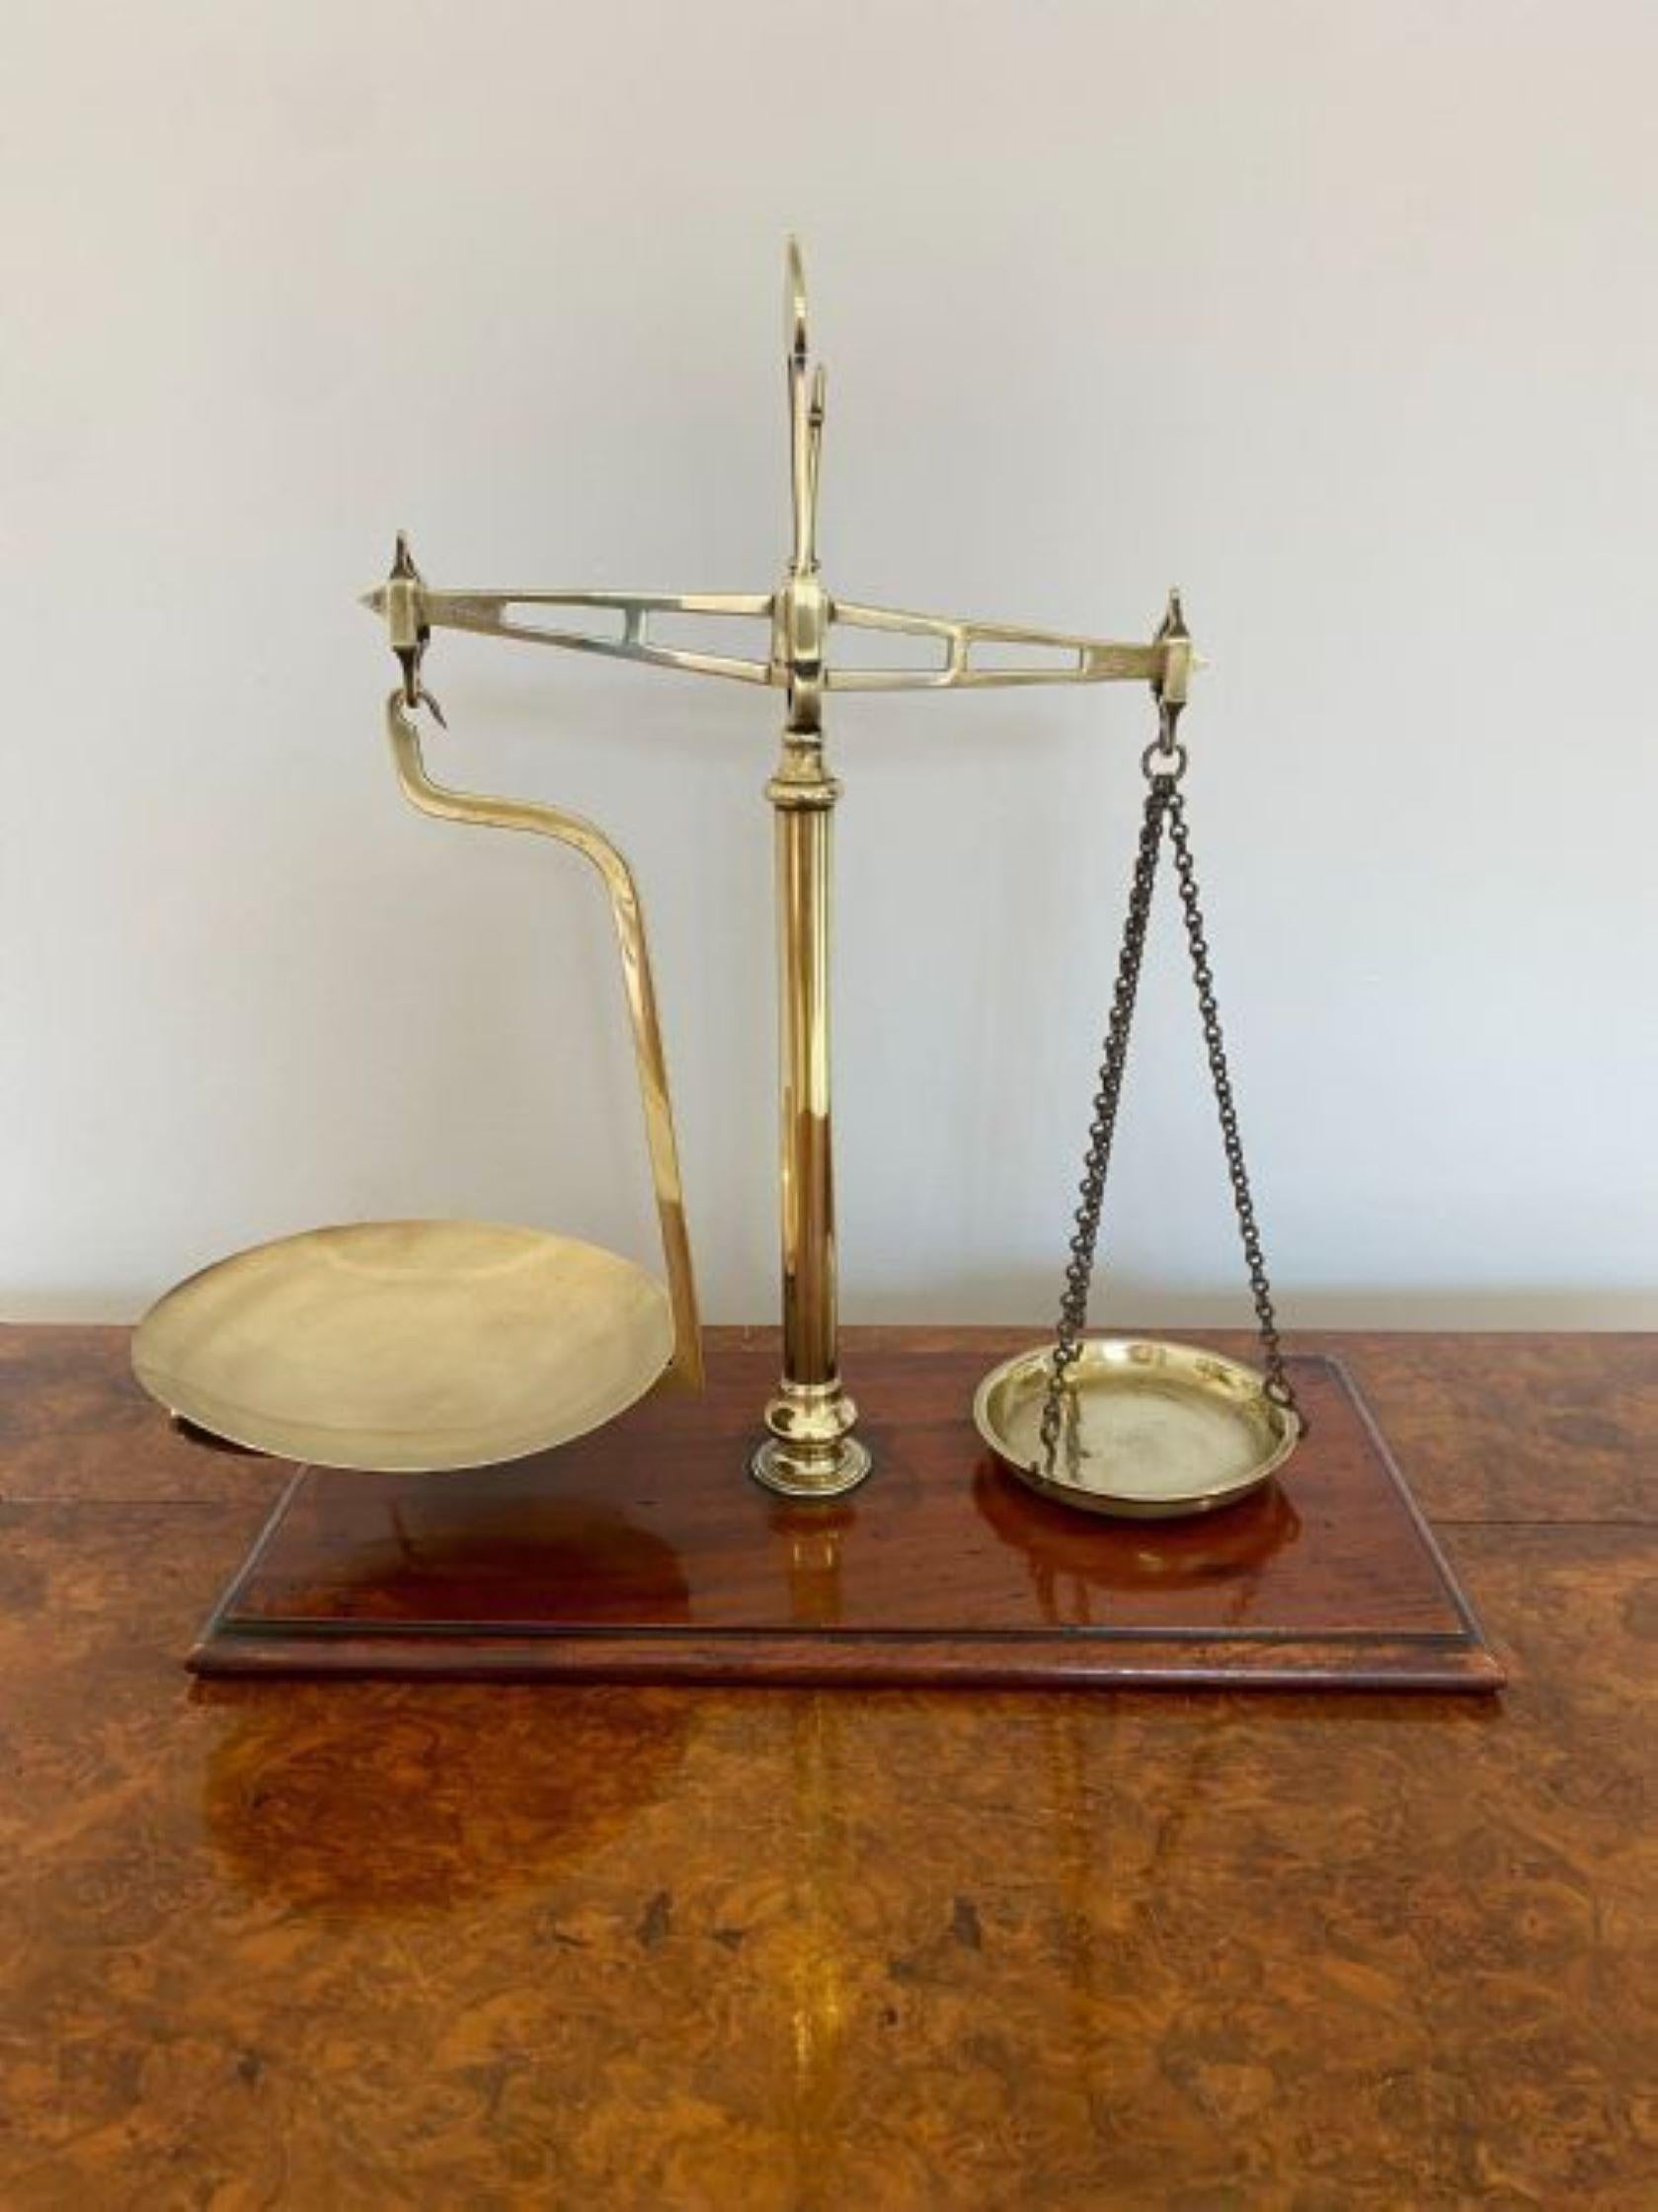 19th Century Quality pair of early Victorian 19th century shop scales